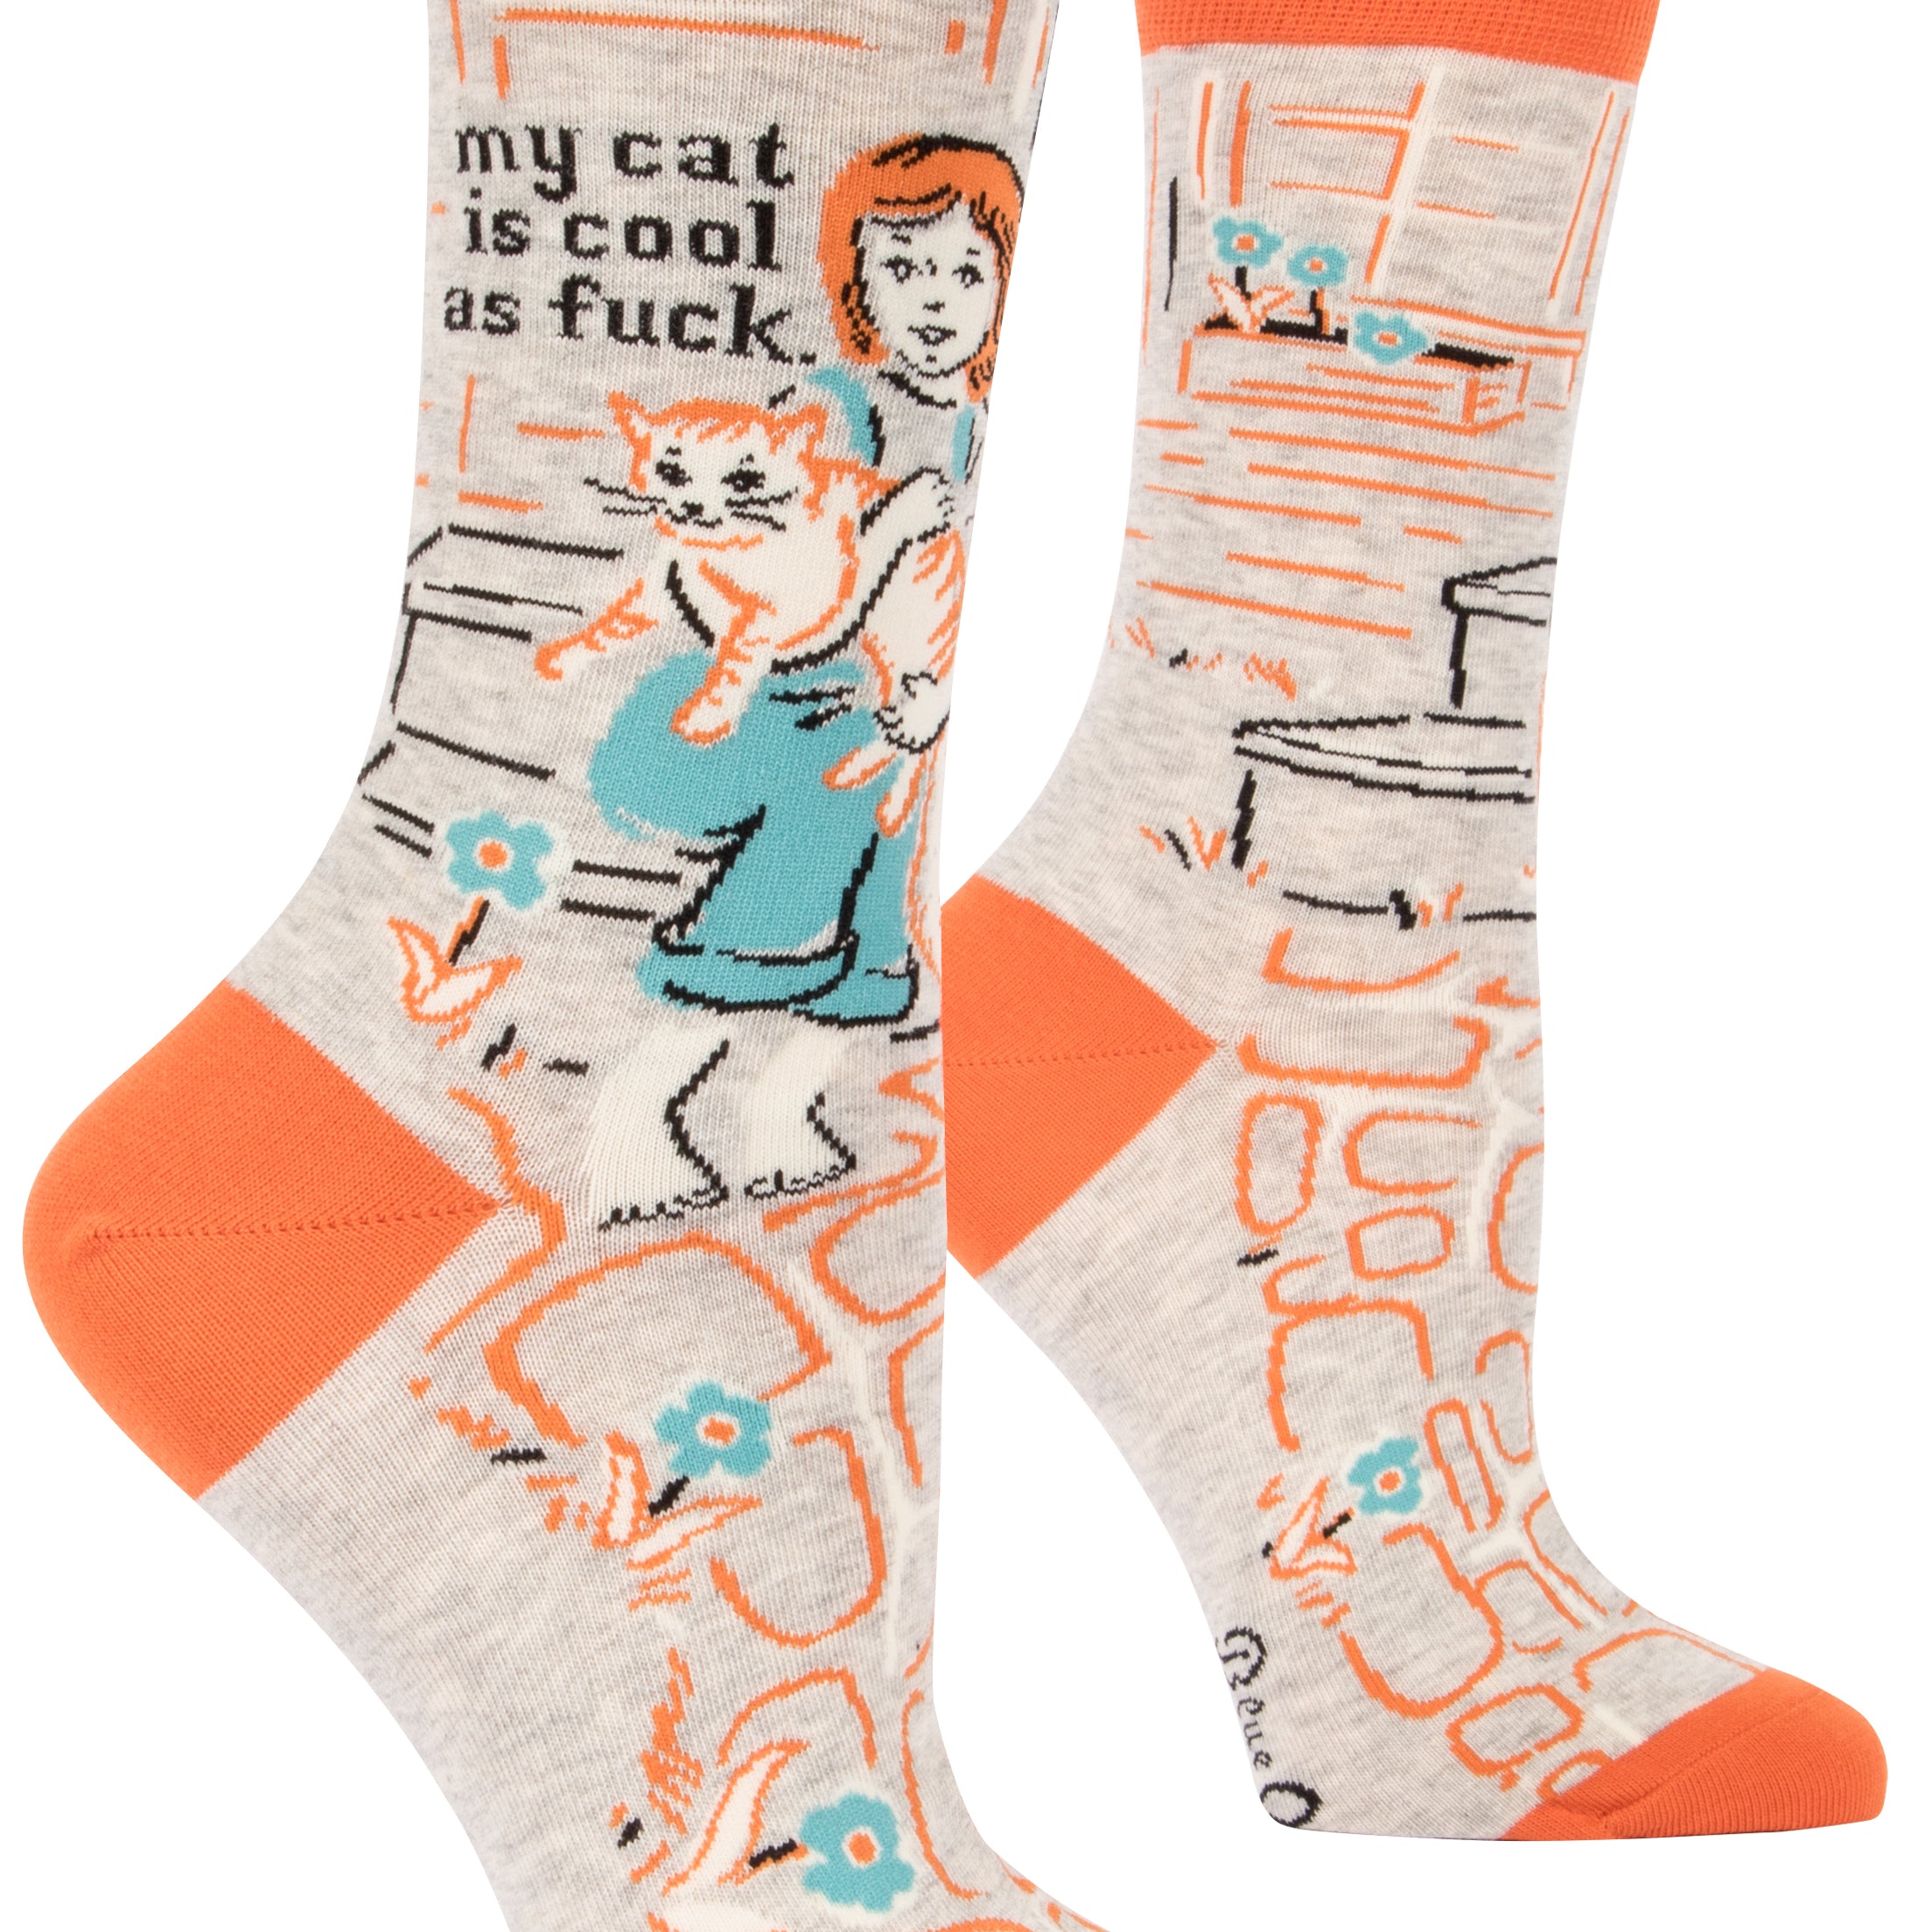 light grey socks with orange tips cartoon of redhead girl with cat on steps and it says my cat if cool as fuck